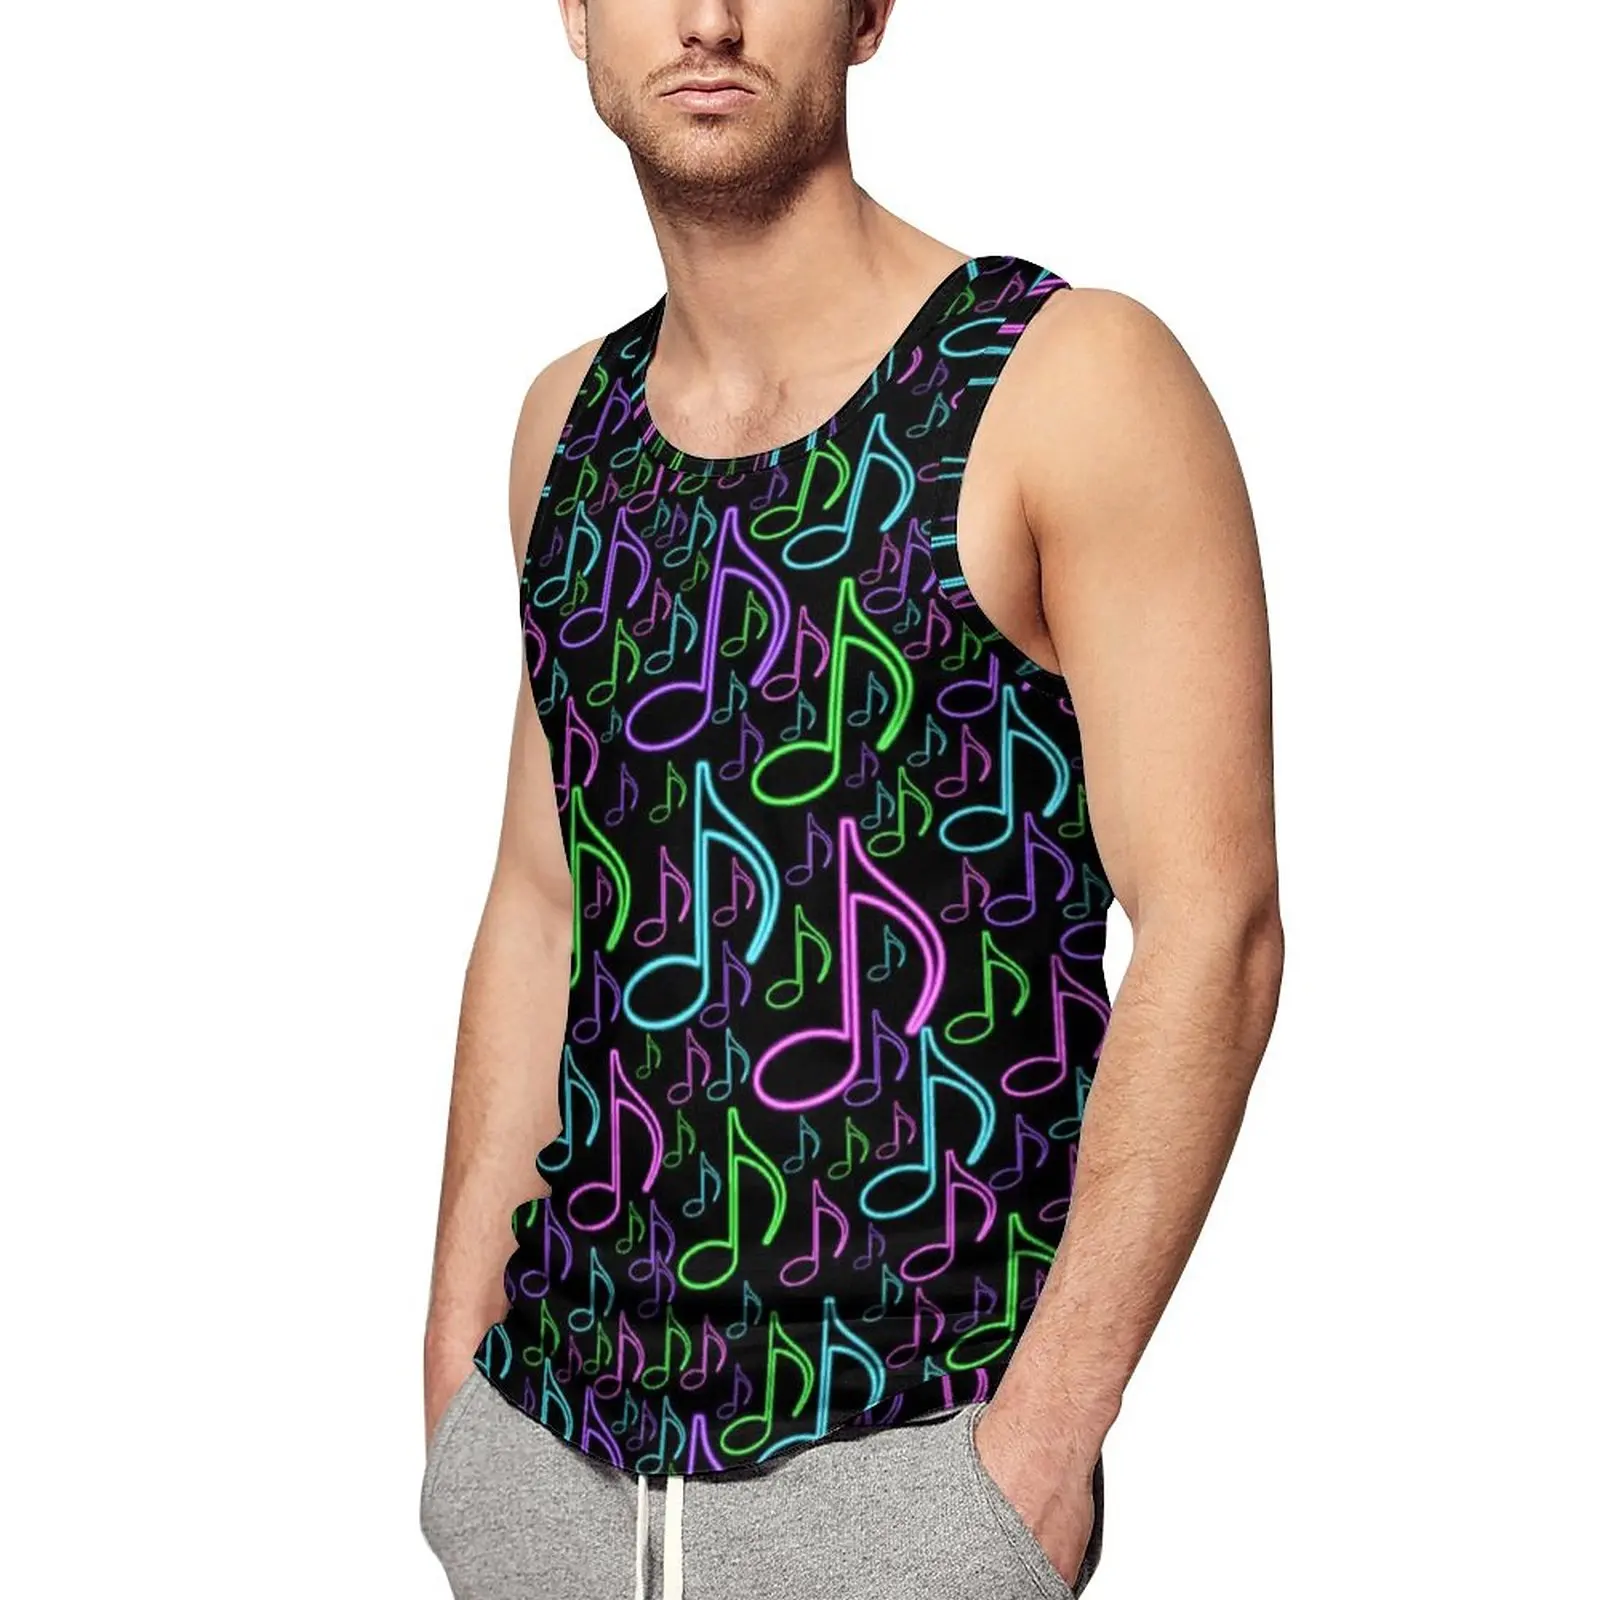 

Colorful Music Tank Top Eighth Notes Random Print Muscle Tops Summer Bodybuilding Man Design Sleeveless Vests Big Size